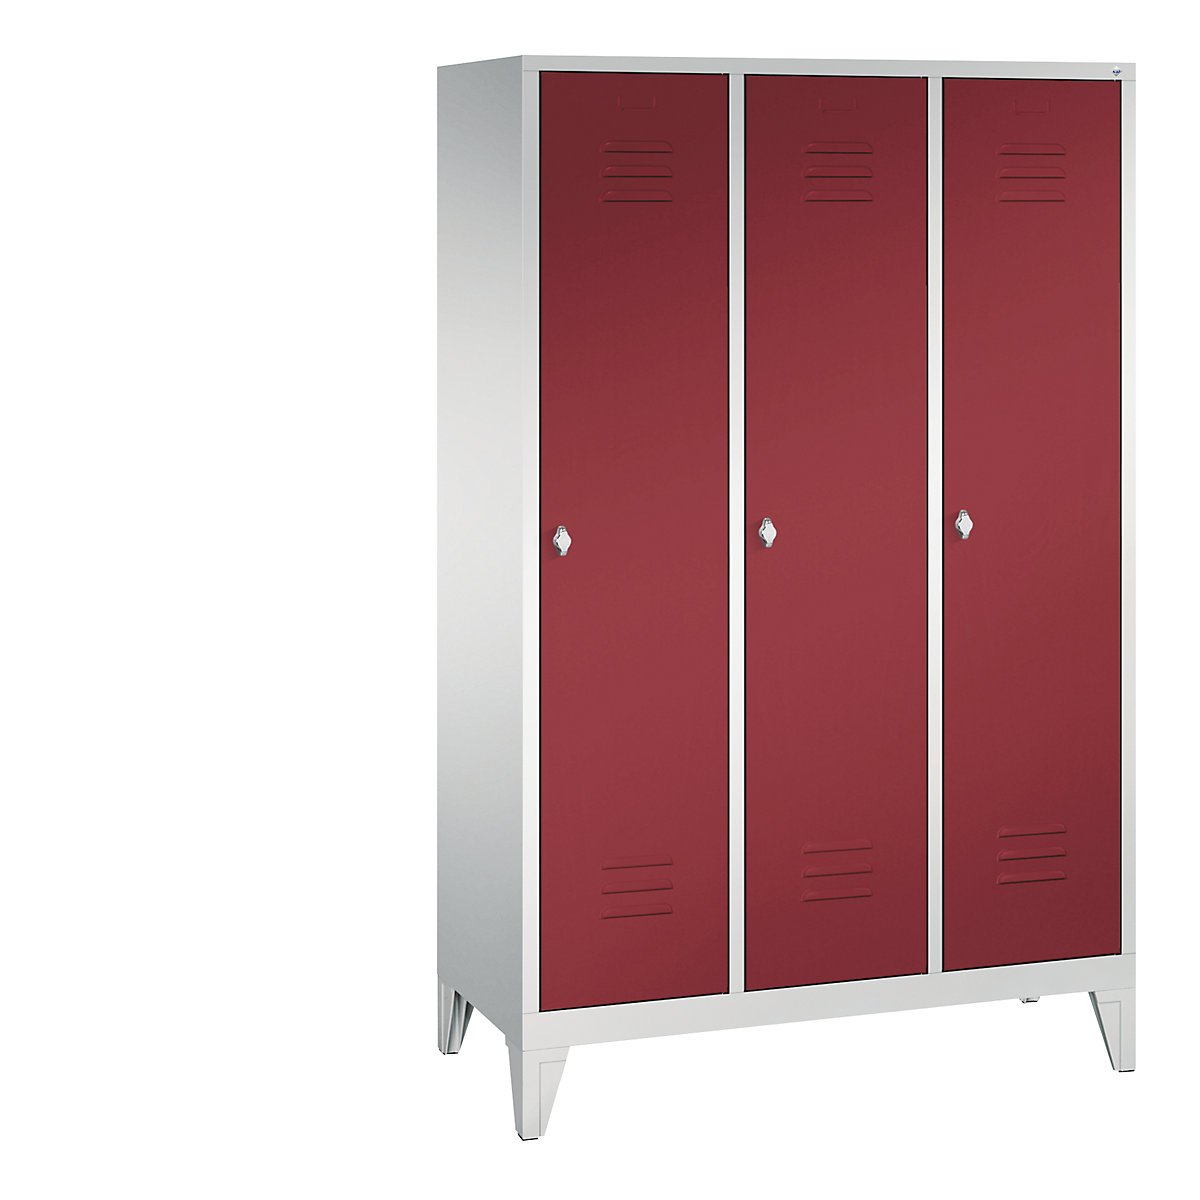 CLASSIC cloakroom locker with feet – C+P, 3 compartments, compartment width 400 mm, light grey / ruby red-5